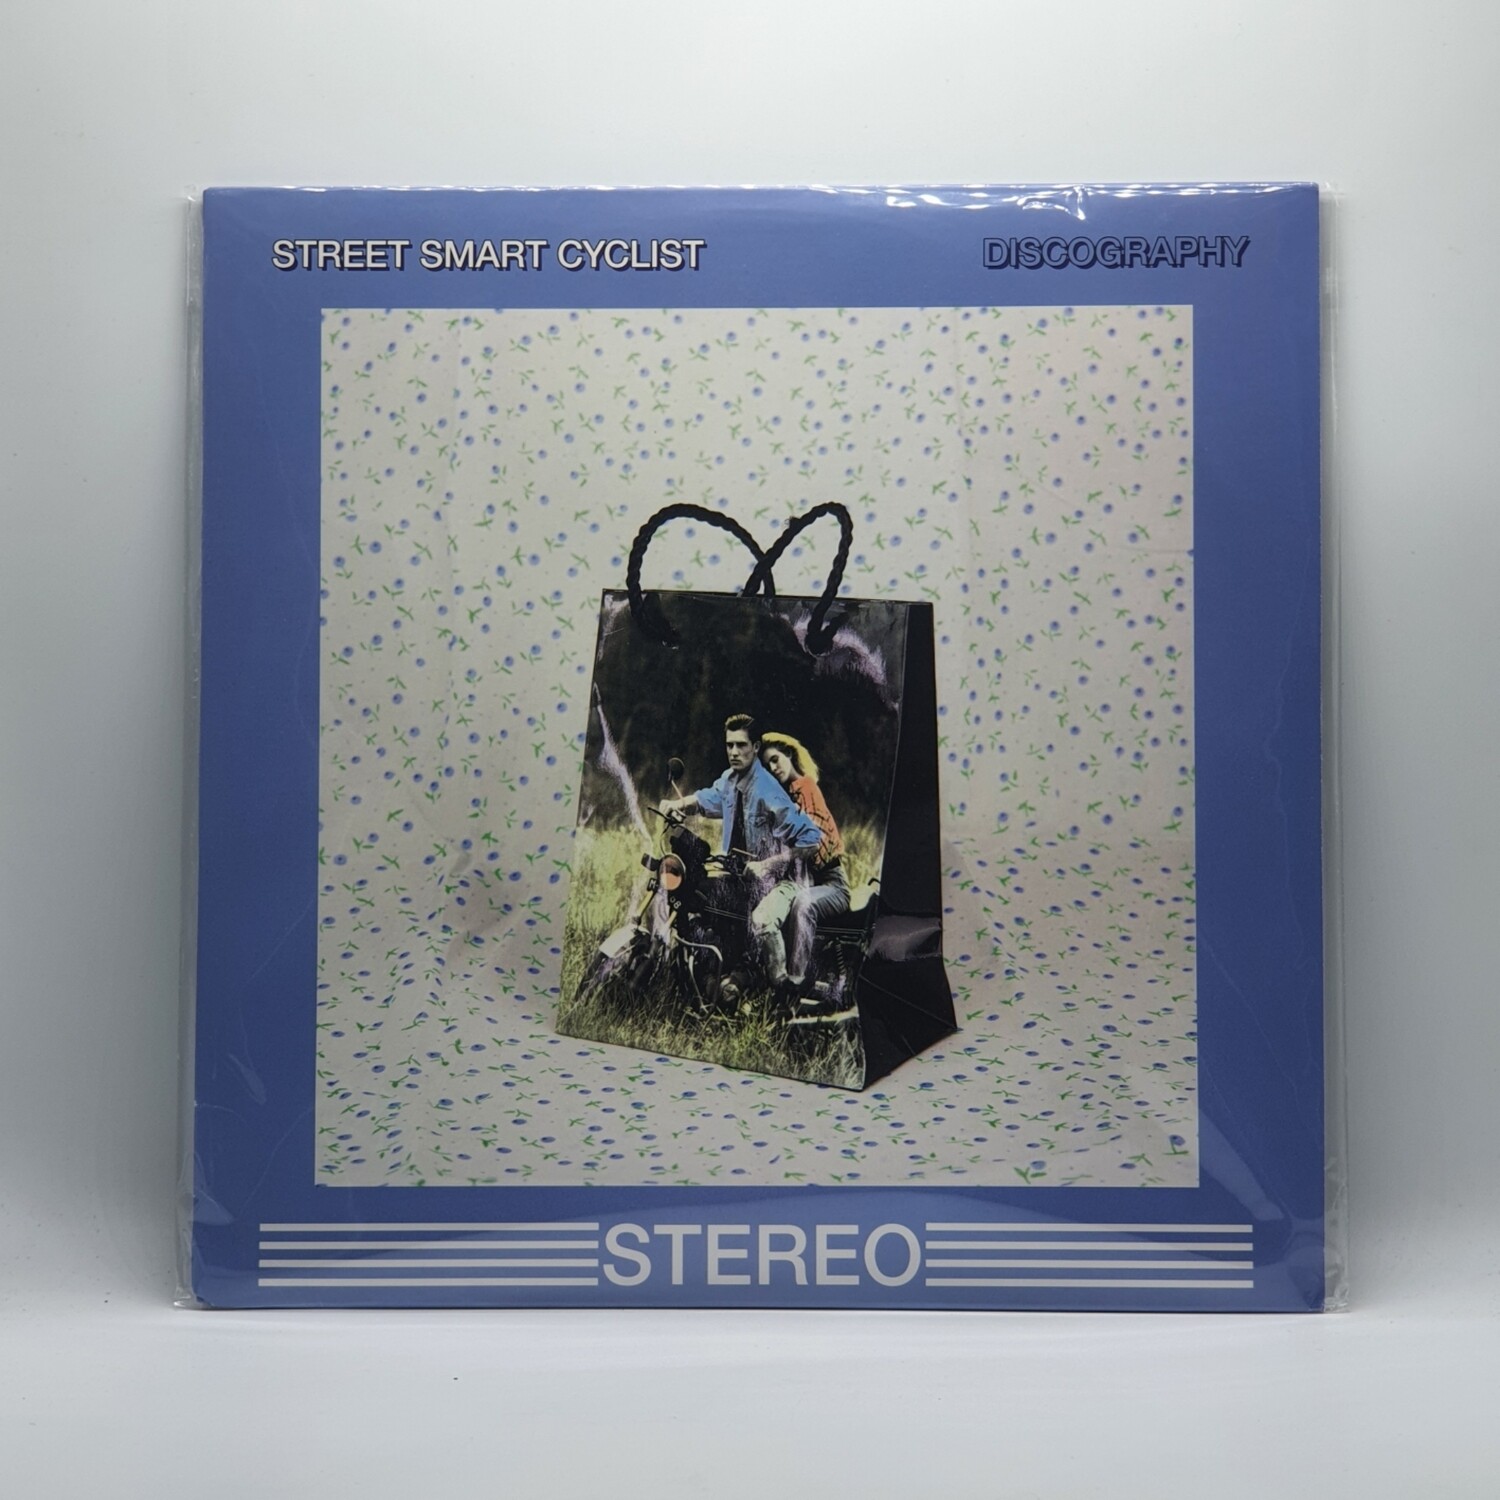 [USED] STREET SMART CYCLIST -DISCOGRAPHY- LP (BLUE VINYL)